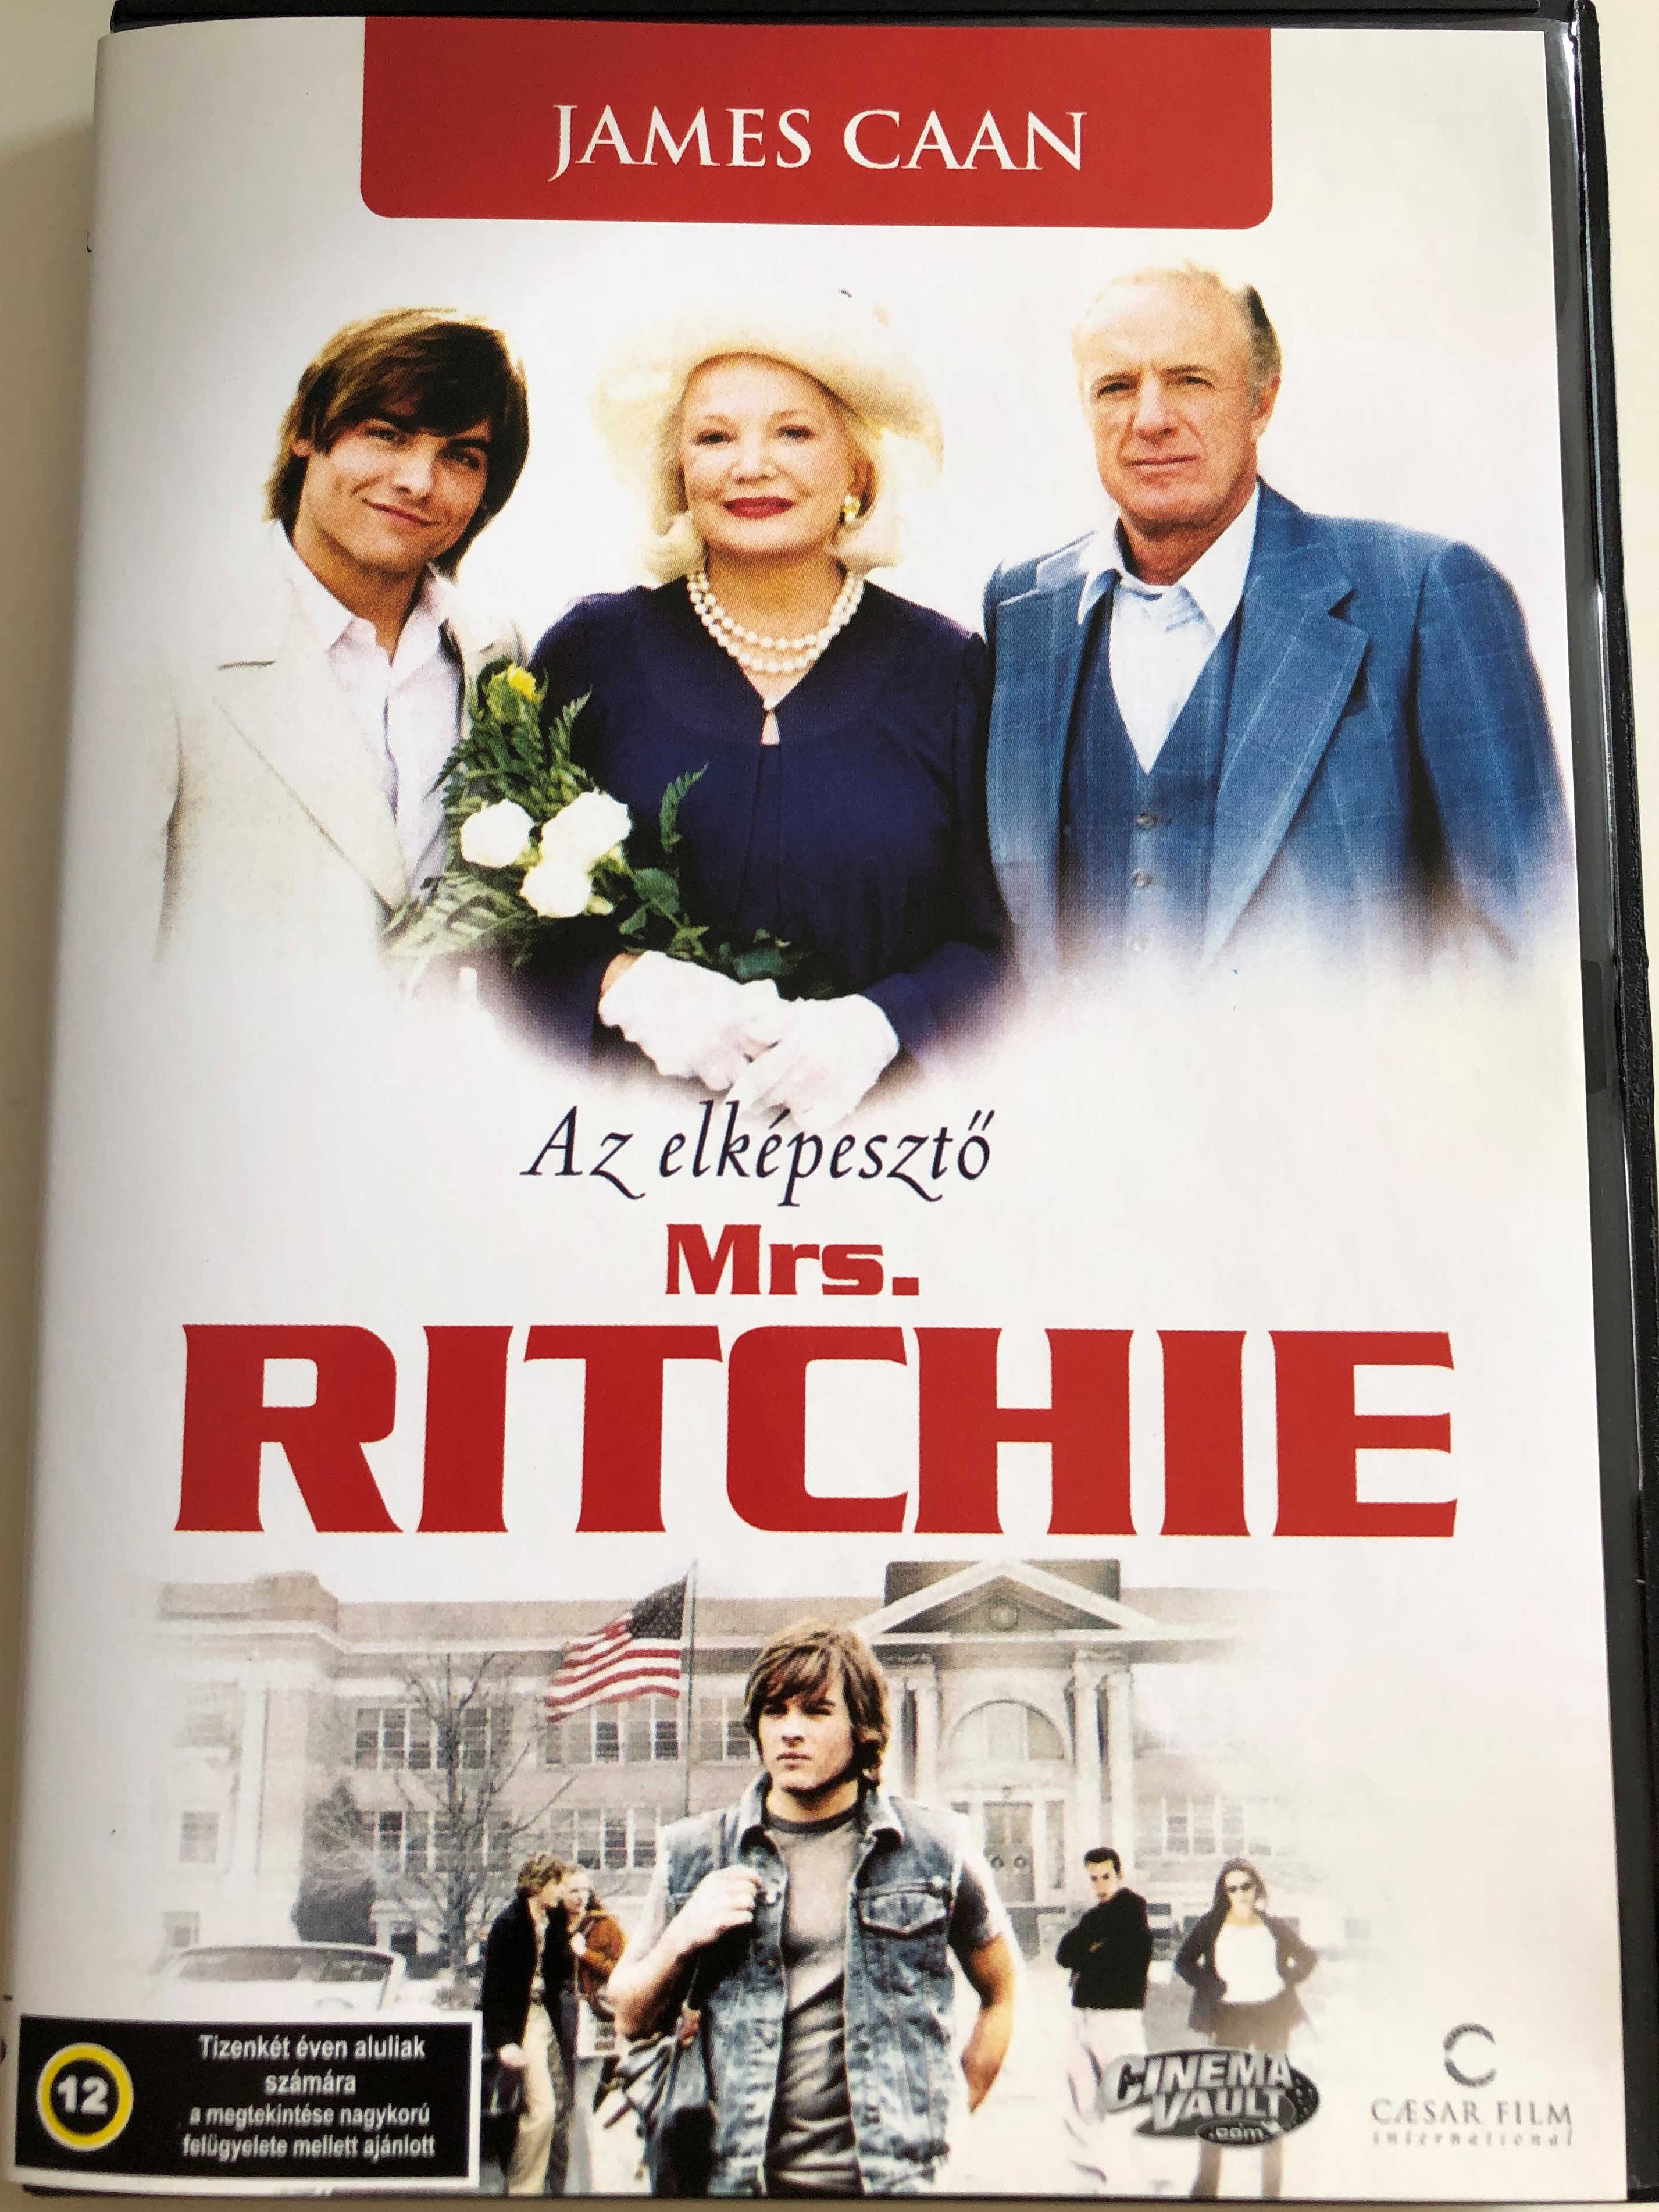 the-incredible-mrs.-ritchie-dvd-2003-az-elk-peszt-mrs.-ritchie-directed-by-paul-johansson-starring-gena-rowlands-kevin-zegers-leslie-hope-cameron-daddo-james-caan-justin-chatwin-1-.jpg